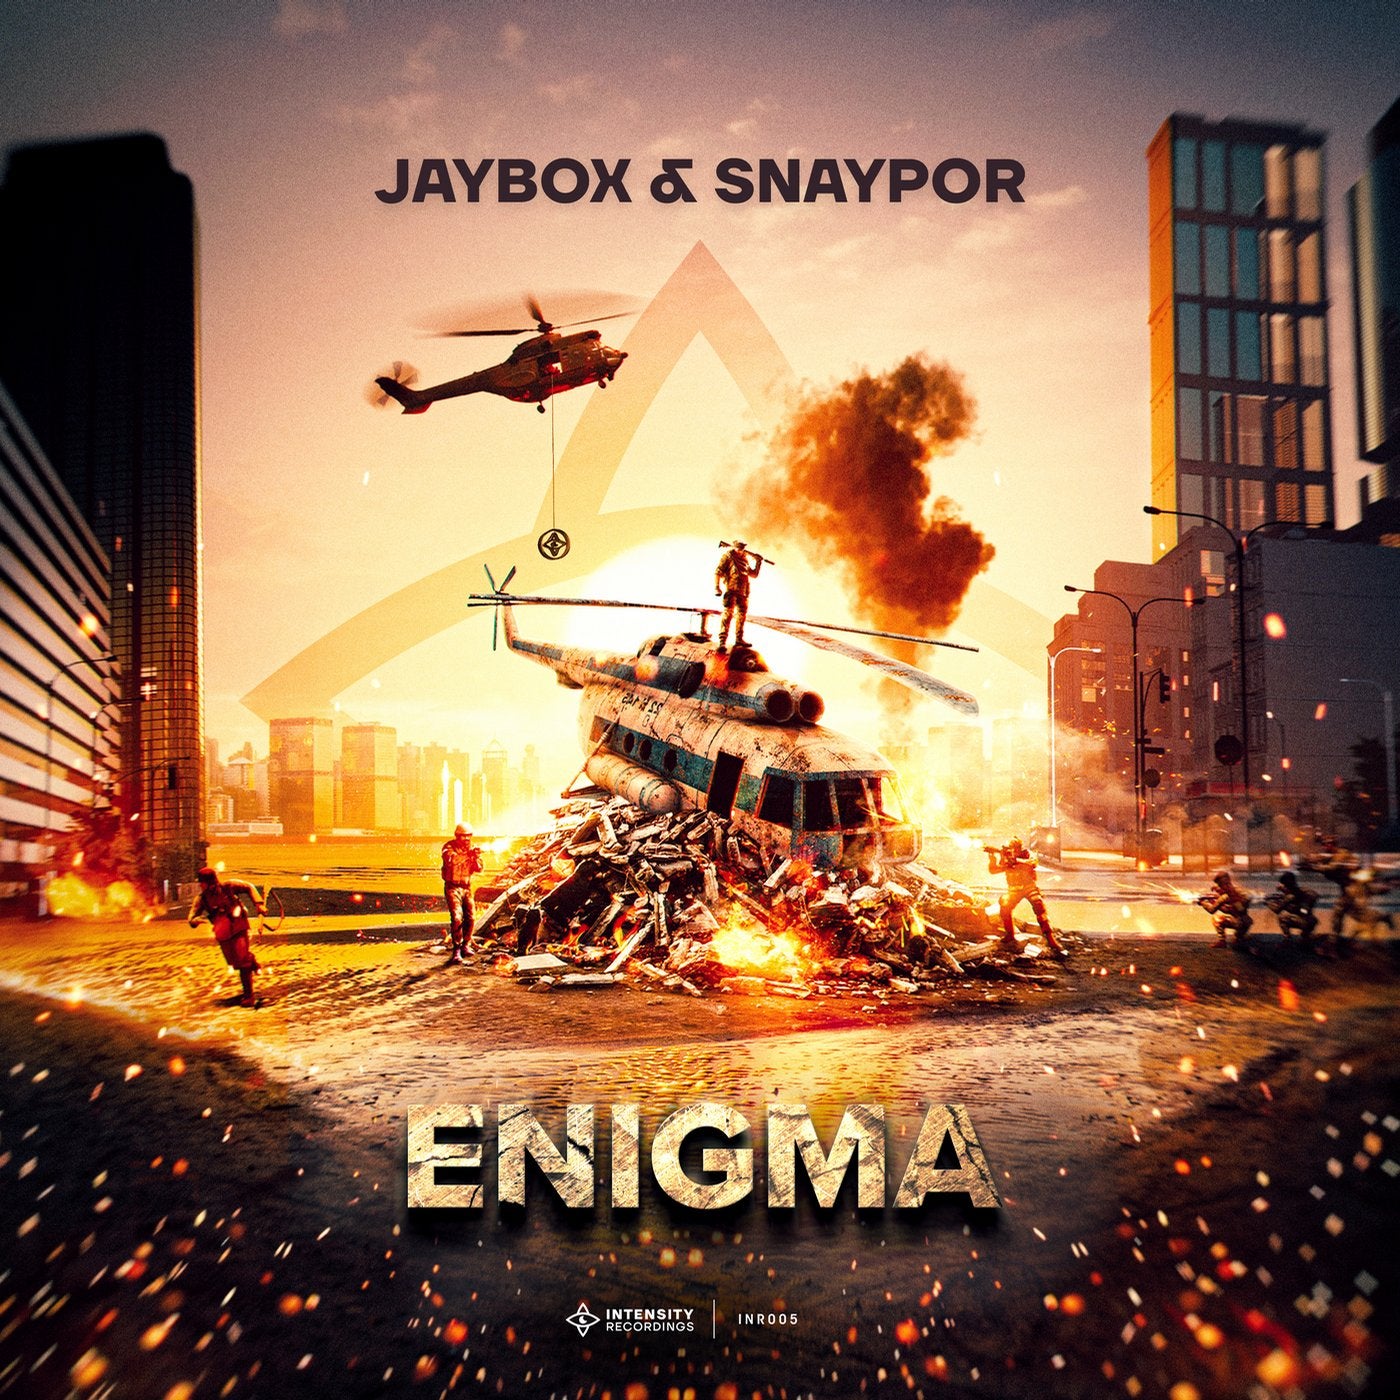 Enigma (Extended Mix) by Jaybox, Snaypor on Beatport